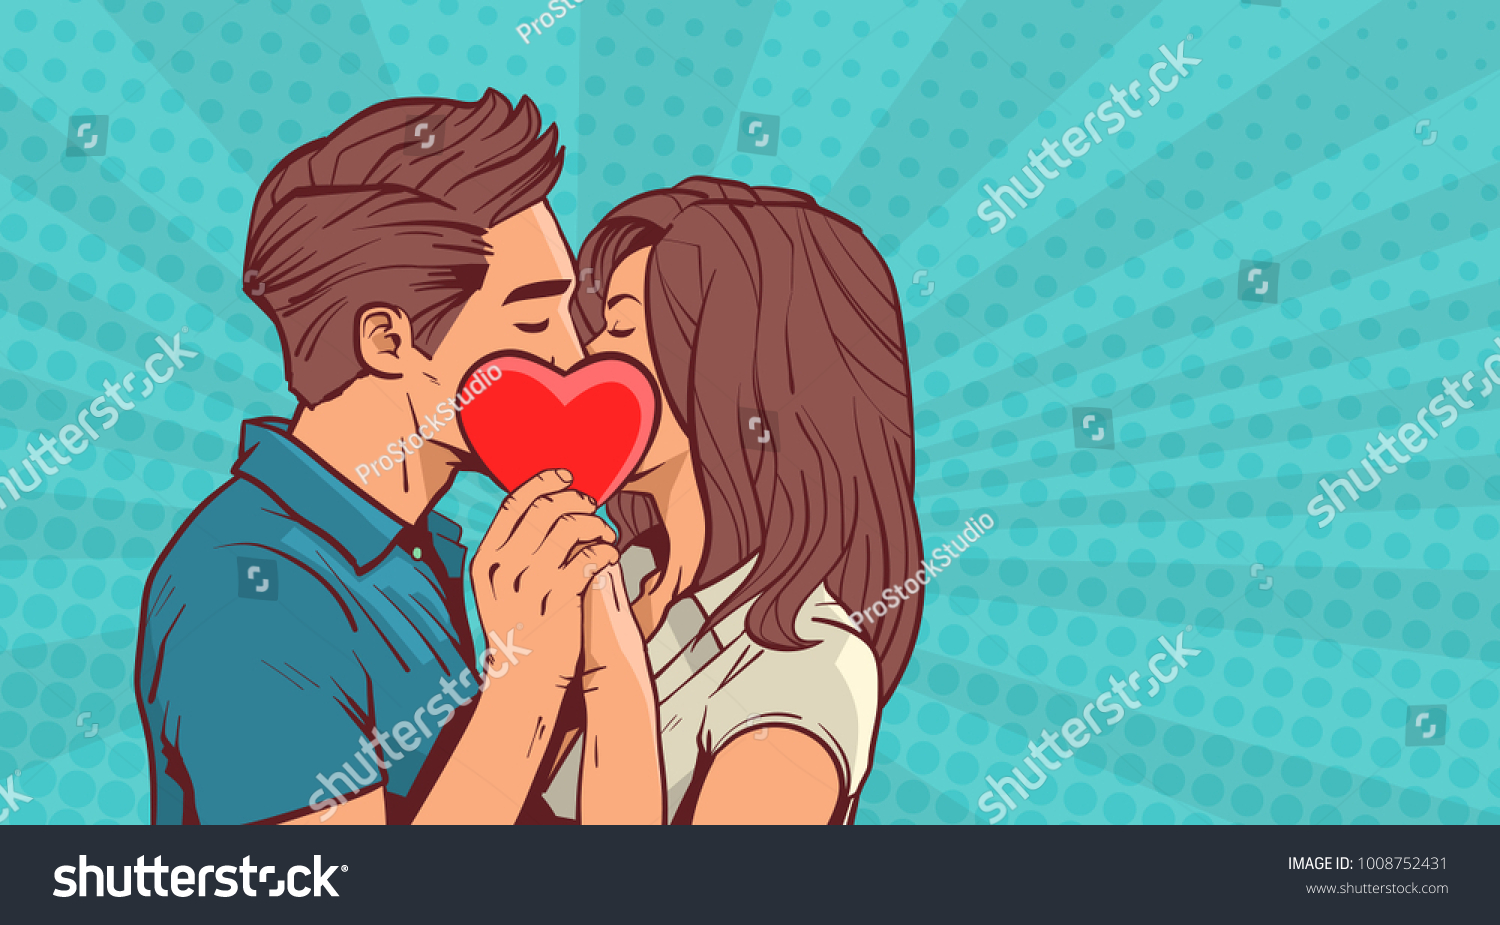 45625 Kissing Love Couples Stock Vectors Images And Vector Art Shutterstock 